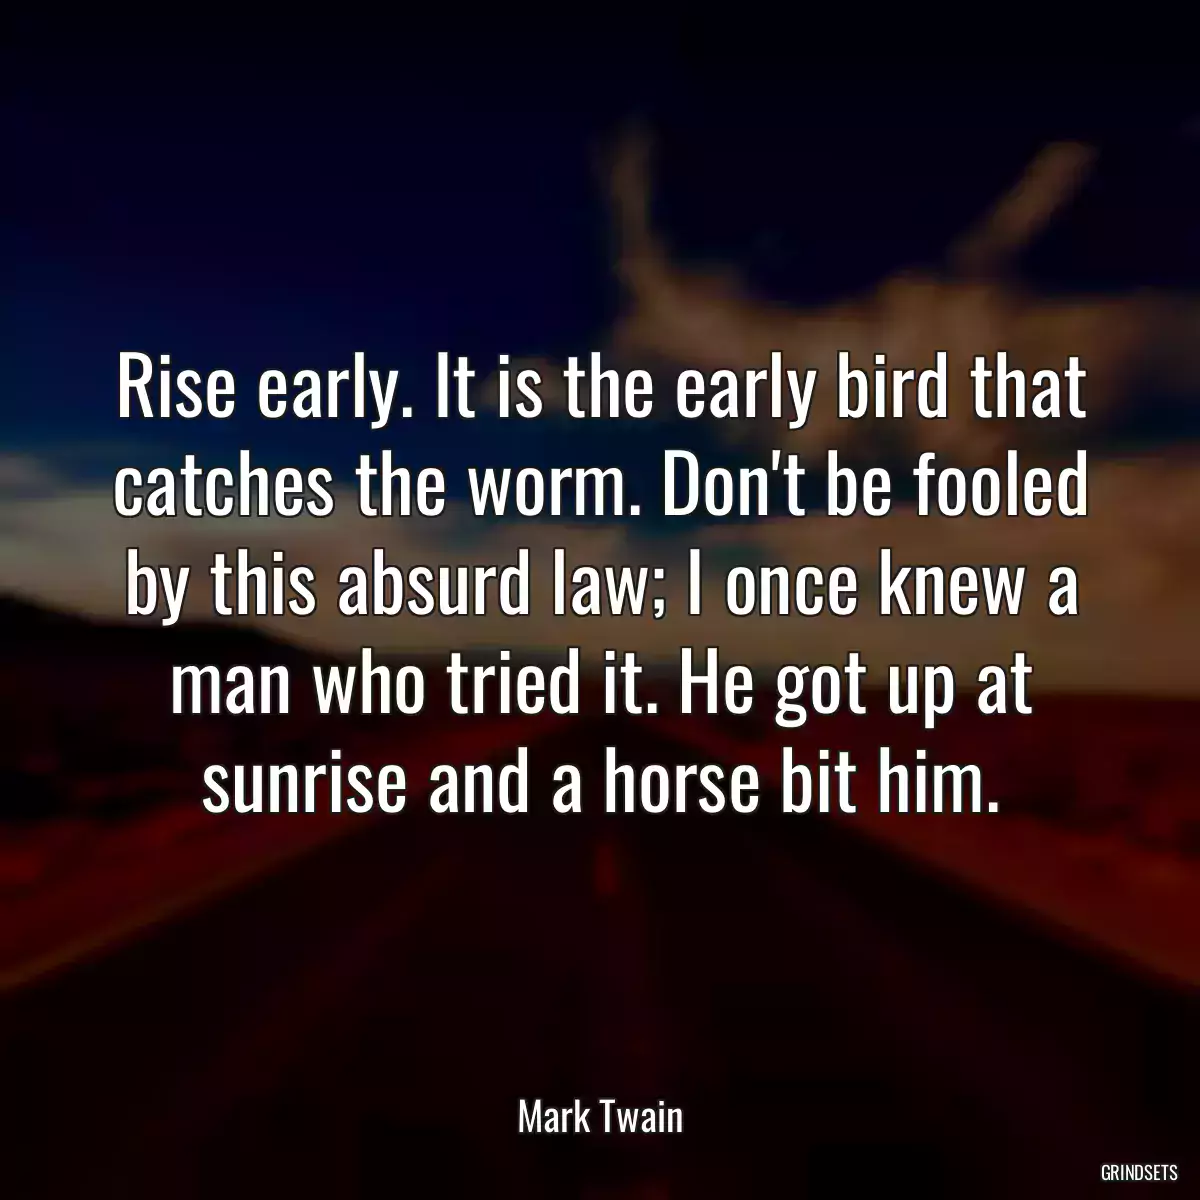 Rise early. It is the early bird that catches the worm. Don\'t be fooled by this absurd law; I once knew a man who tried it. He got up at sunrise and a horse bit him.